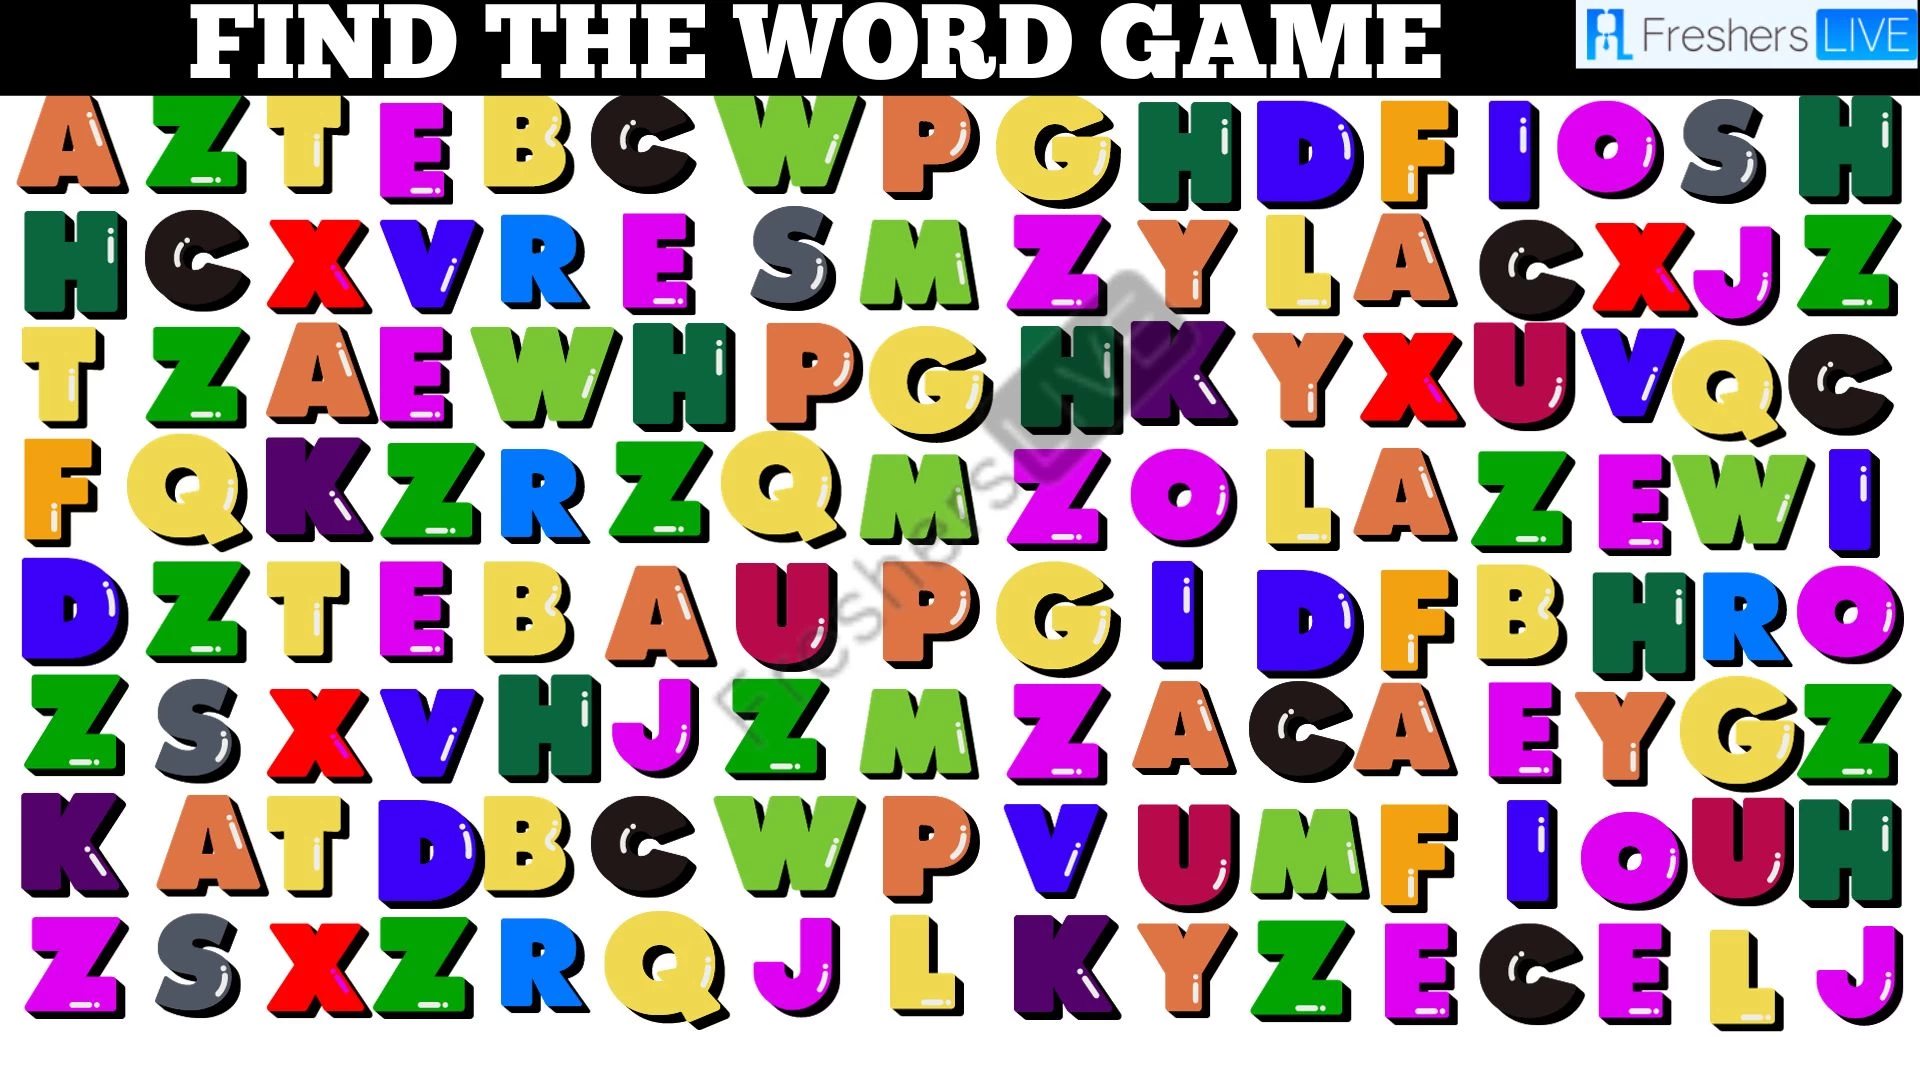 Are you smart enough to Find the Word Game in Under 10 Seconds